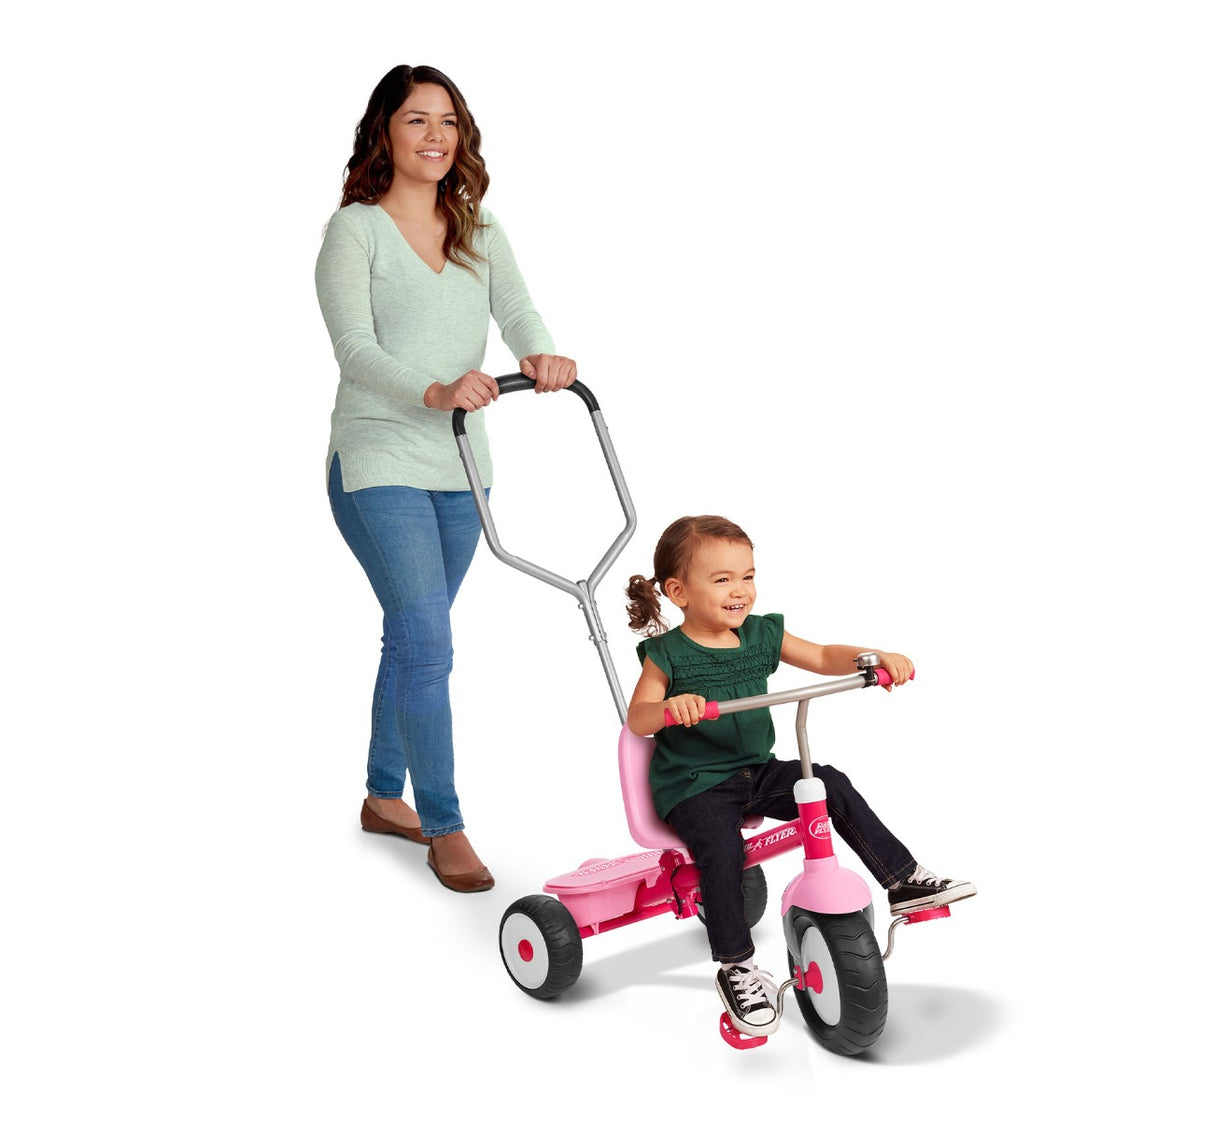 Woman Pushing Girl Riding Deluxe Steer & Stroll Trike®